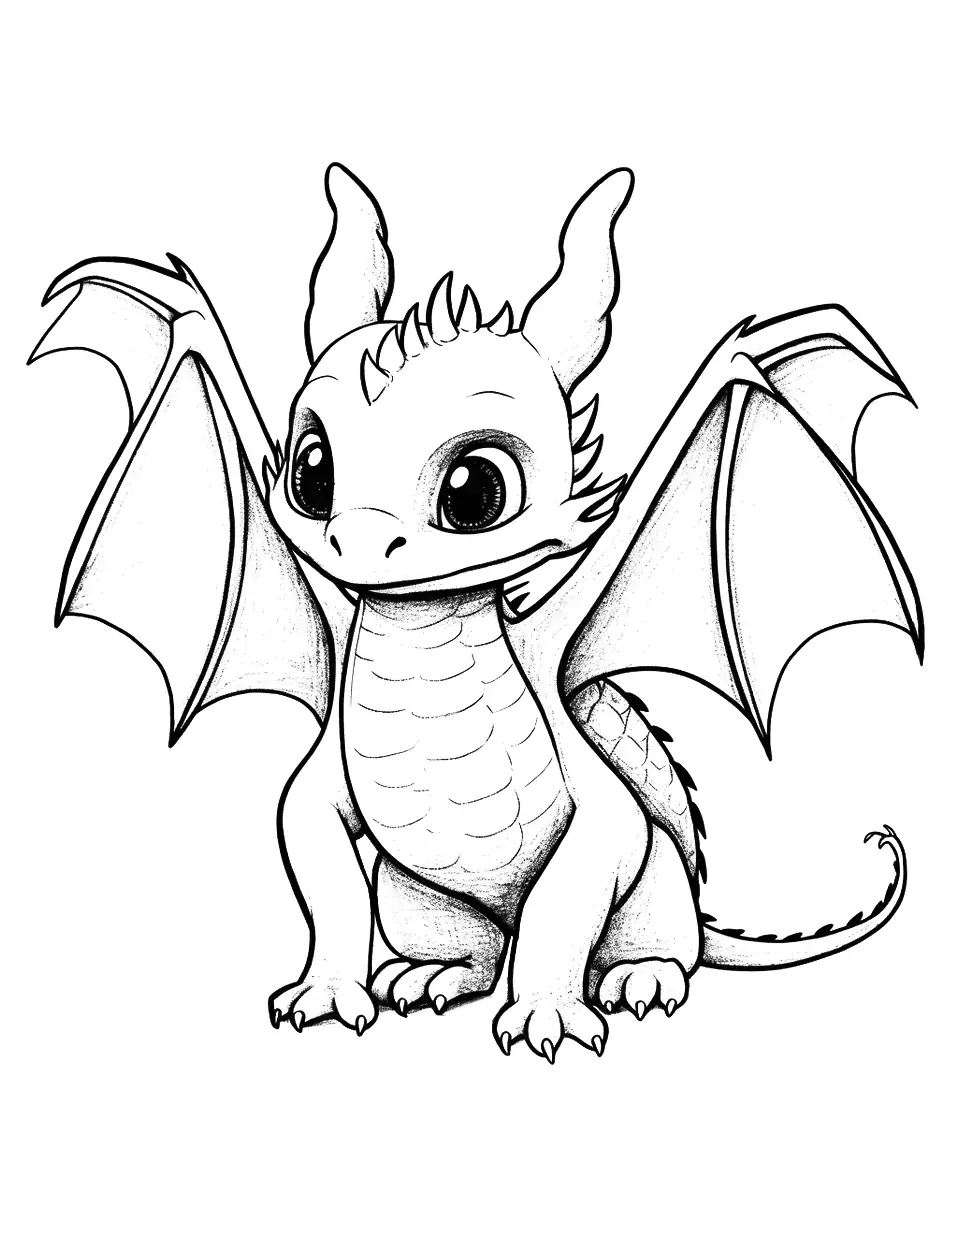 Baby Night Fury Coloring Page - A baby Night Fury, ready to learn how to fly.